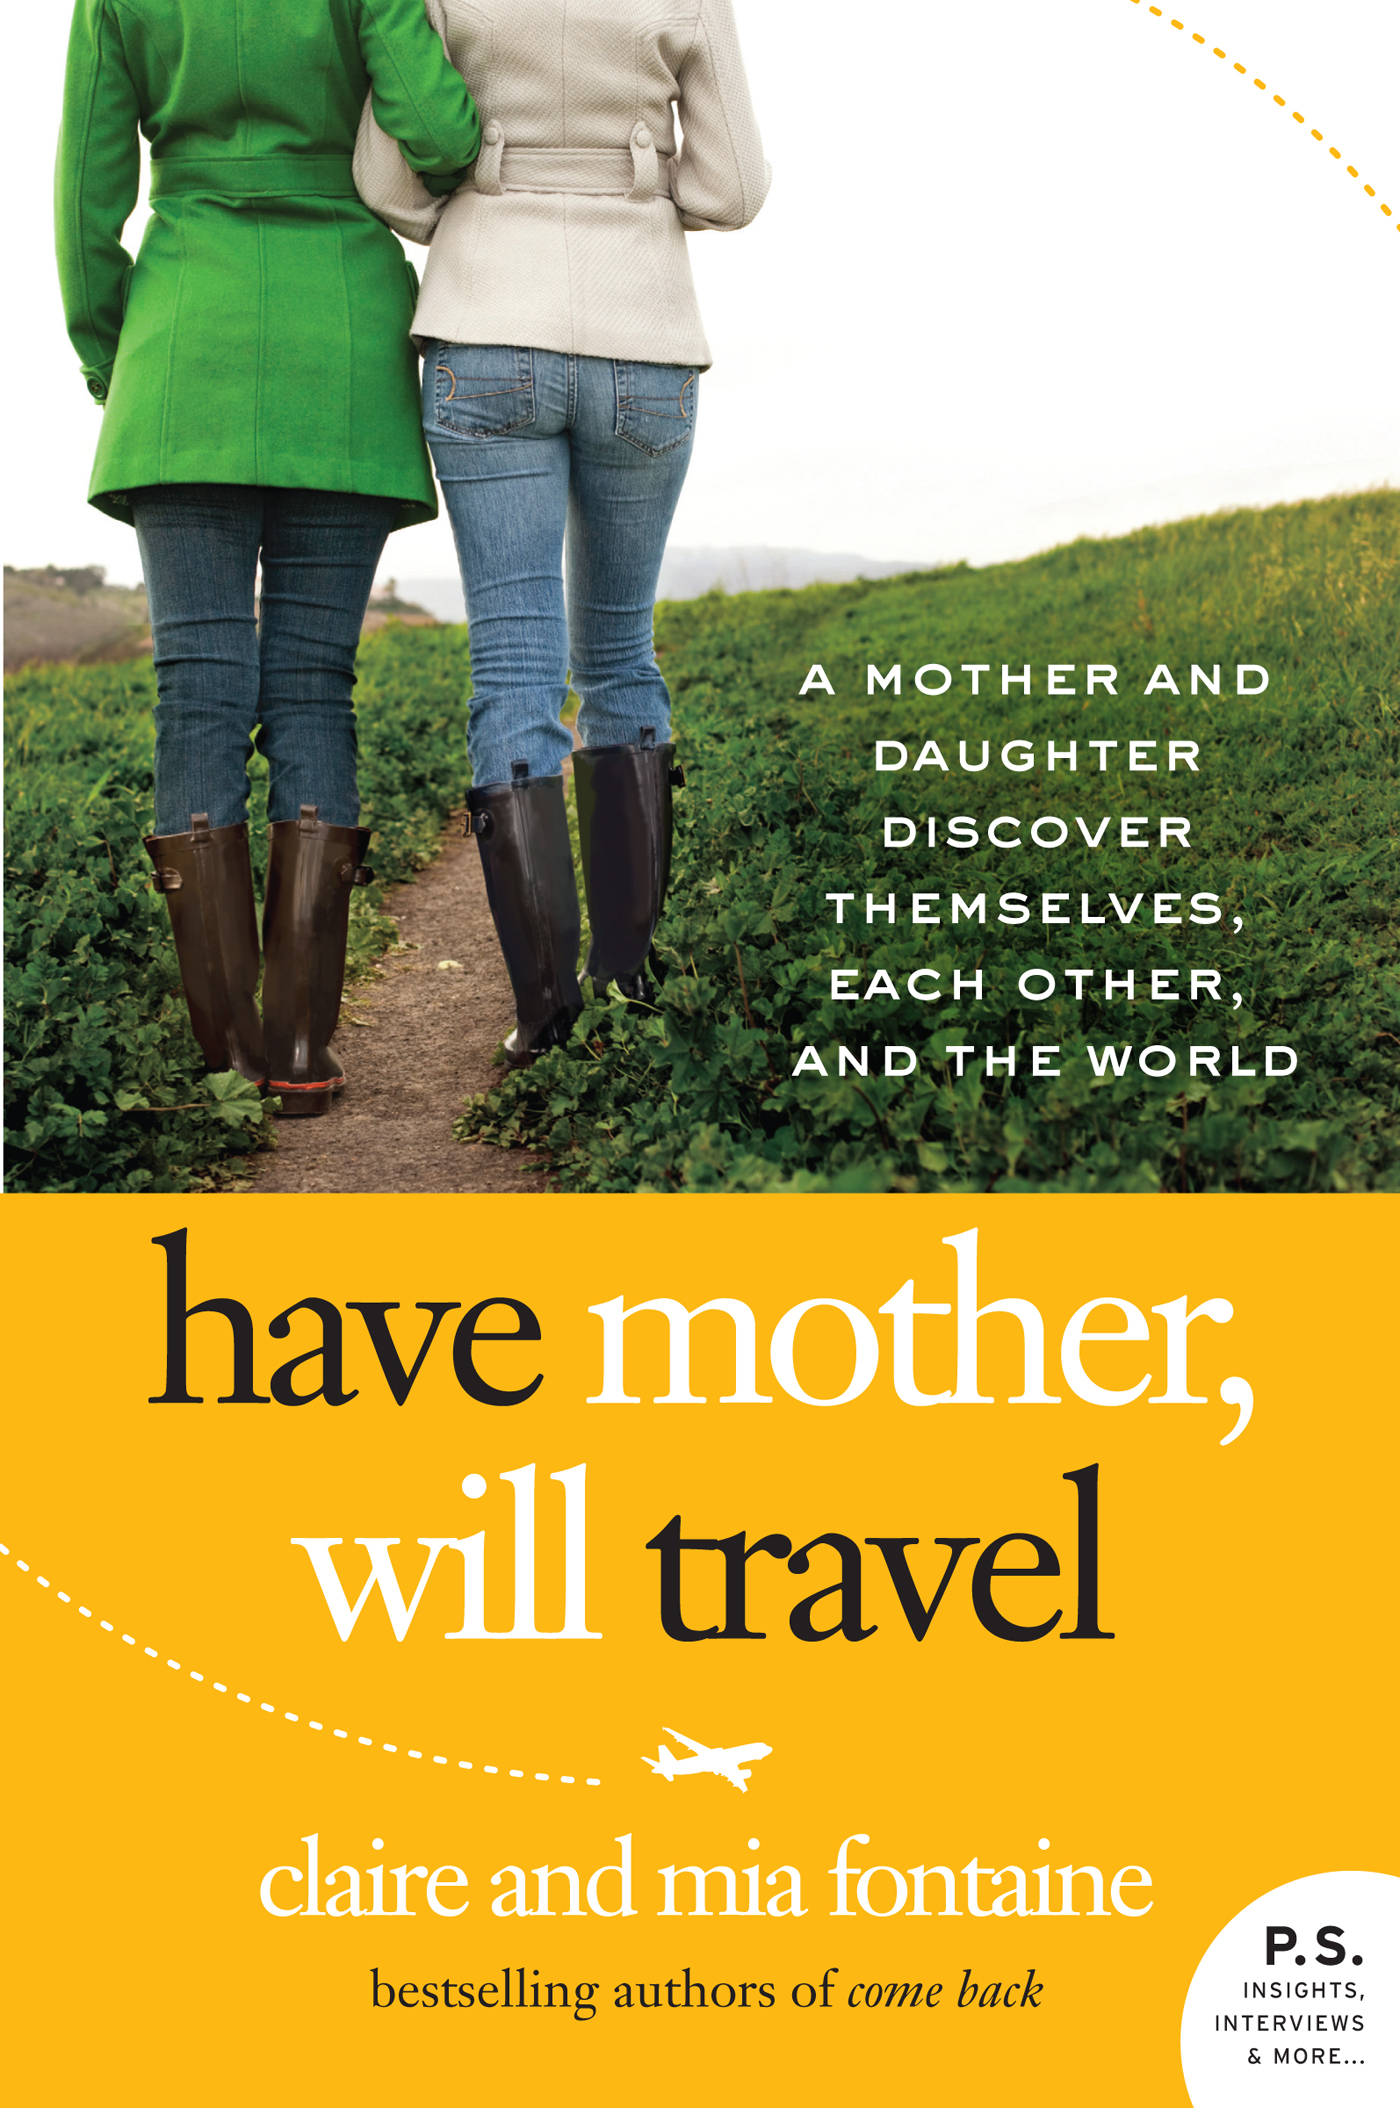 Mother-Daughter Travel